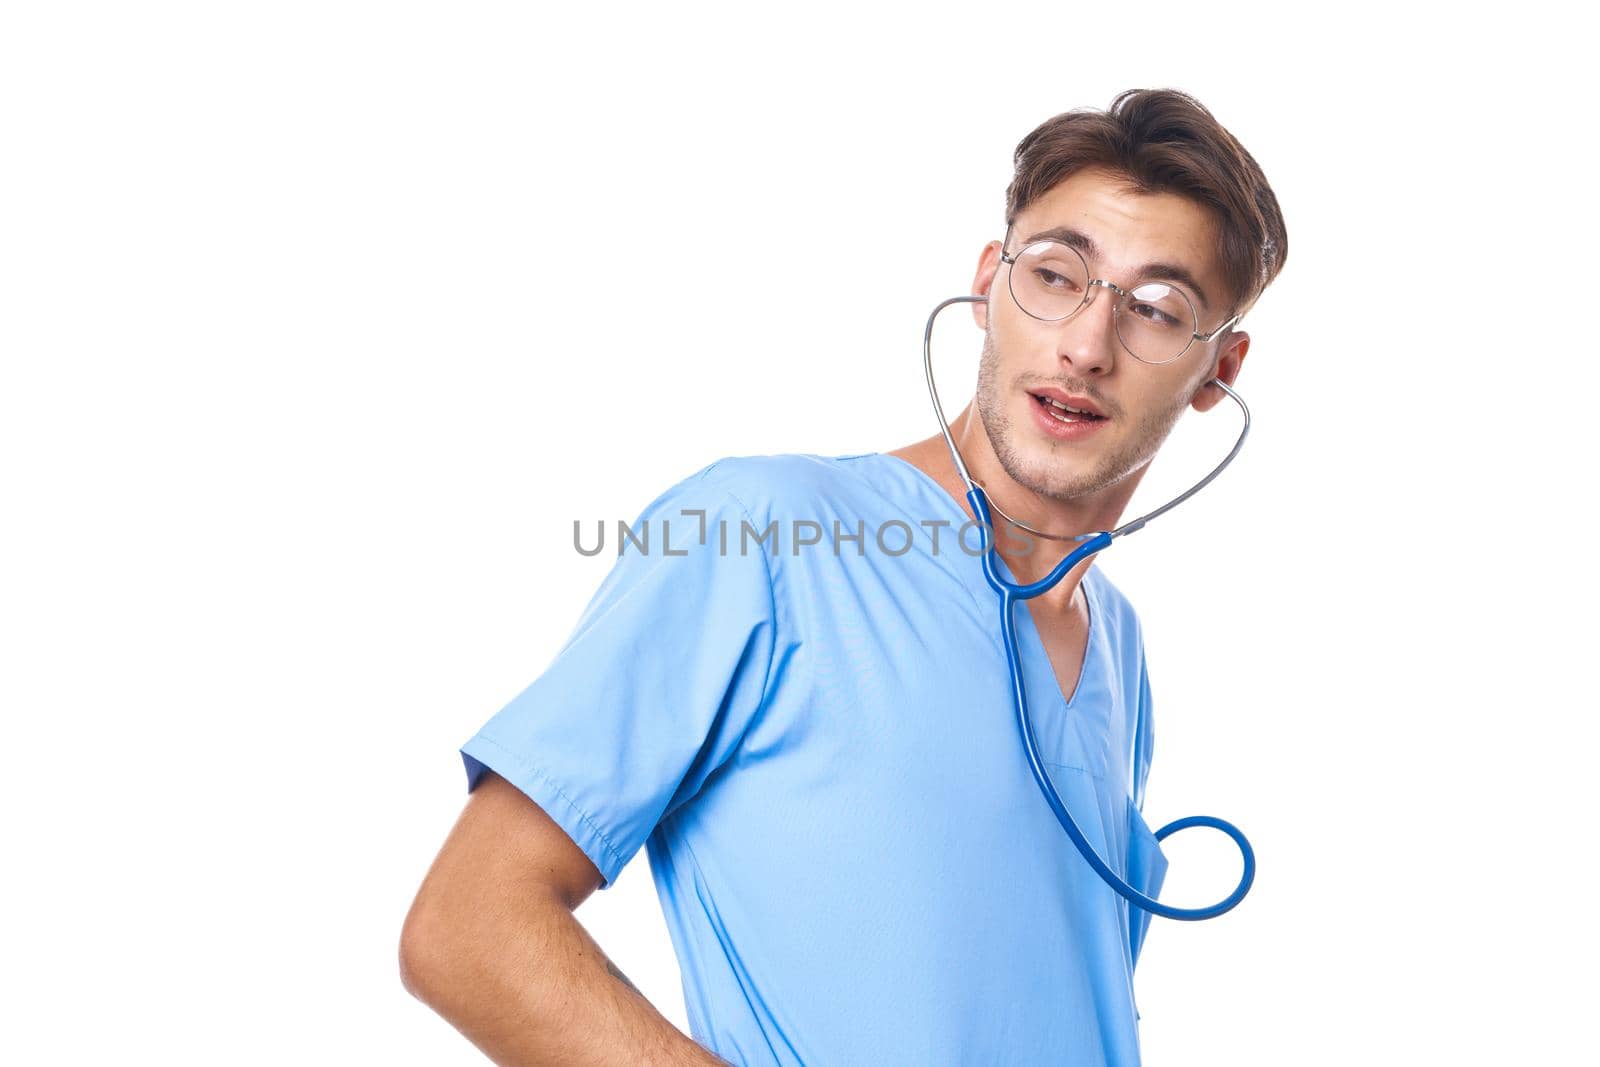 man in medical uniform health care treatment stethoscope examination isolated background by Vichizh